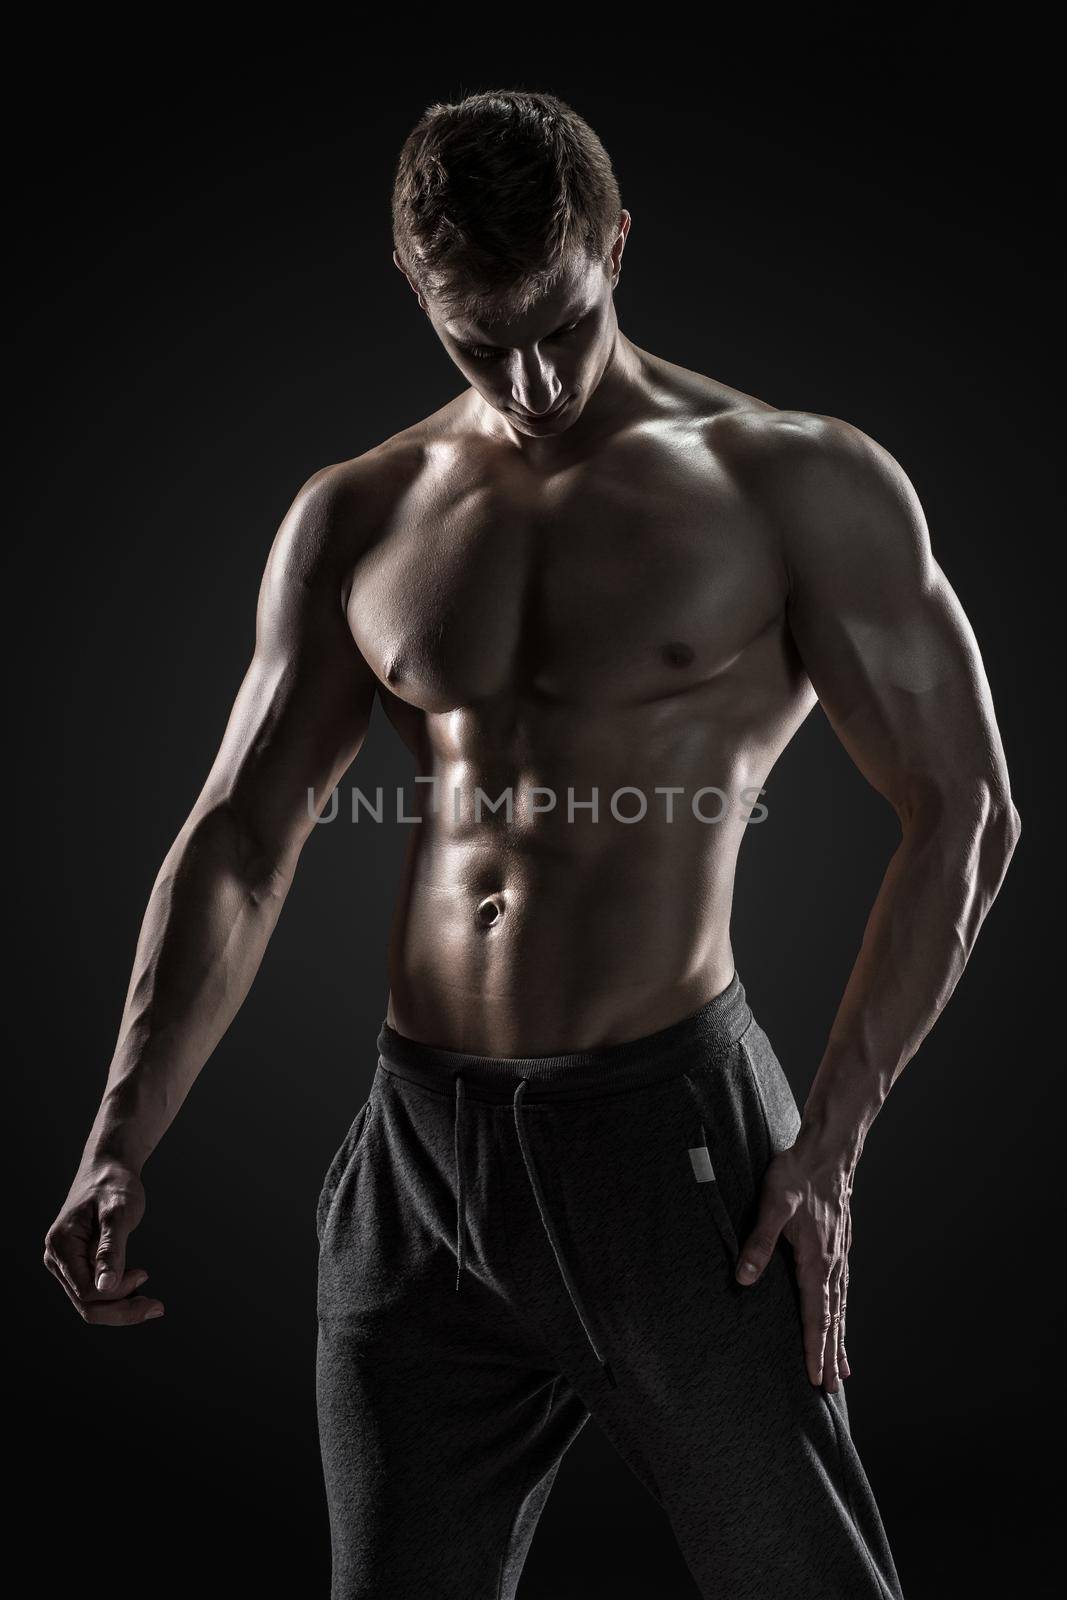 Sporty and healthy man posing and showing his perfect boddy on black background